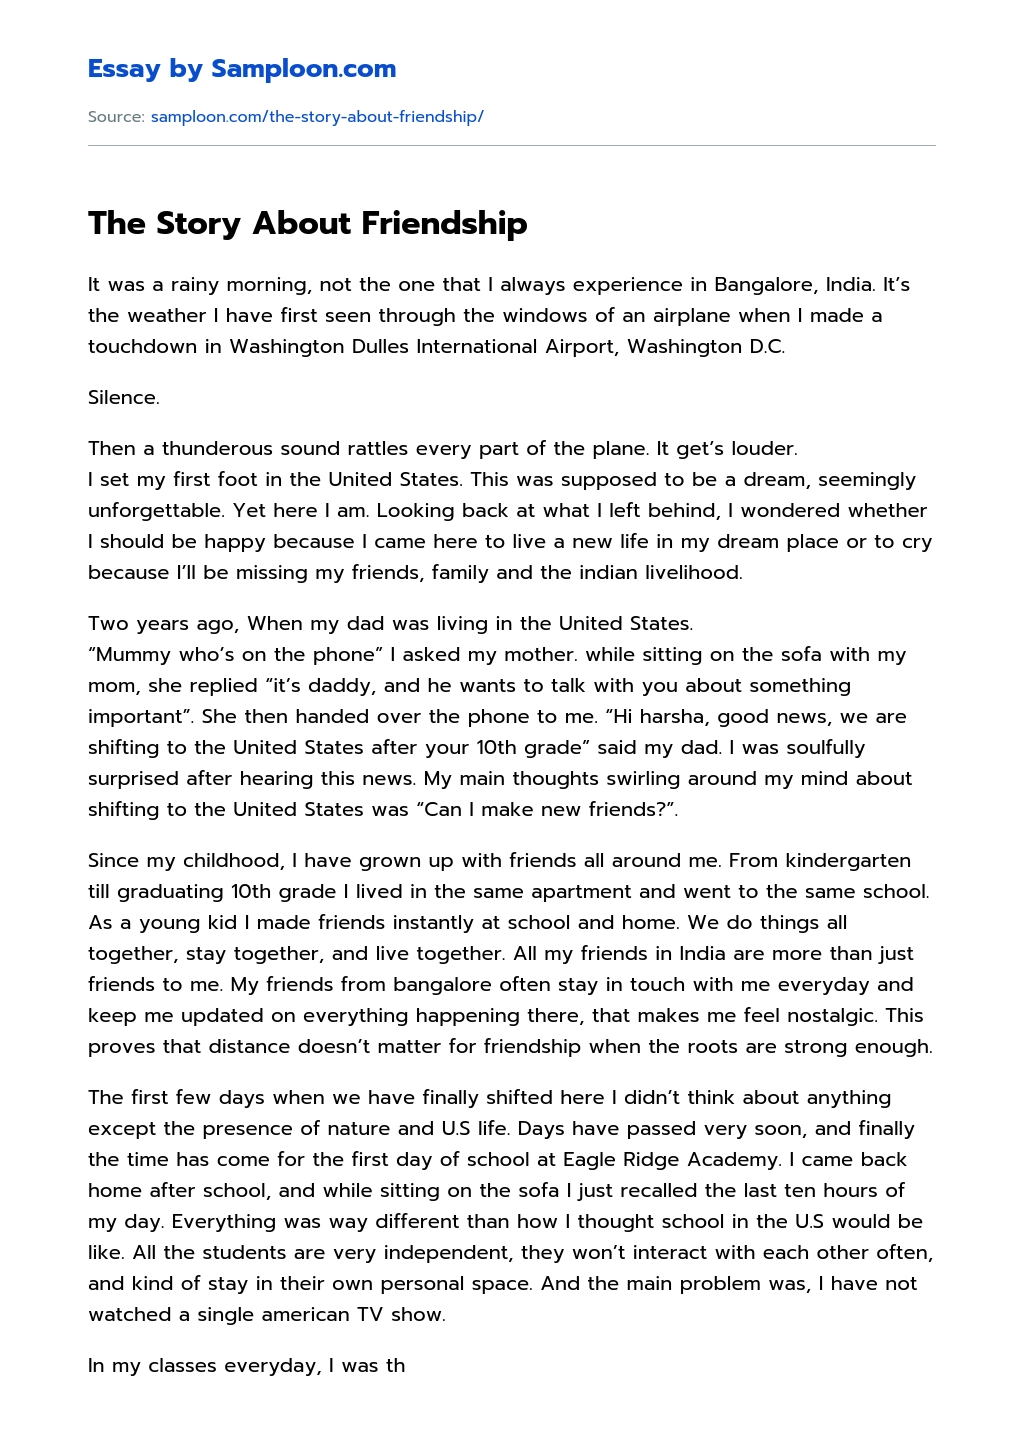 The Story About Friendship  essay